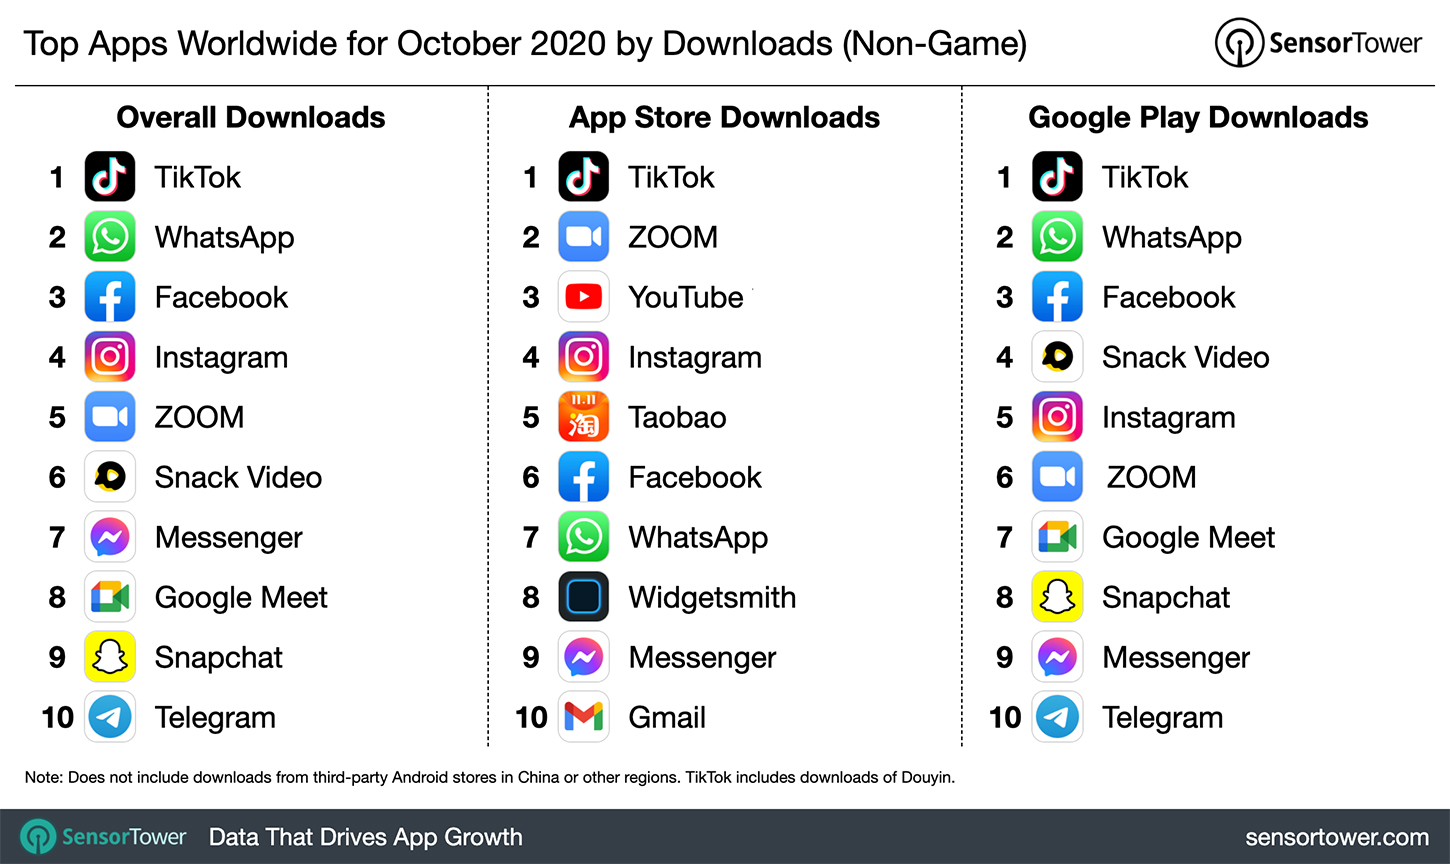 Top Apps Worldwide for October 2020 by Downloads